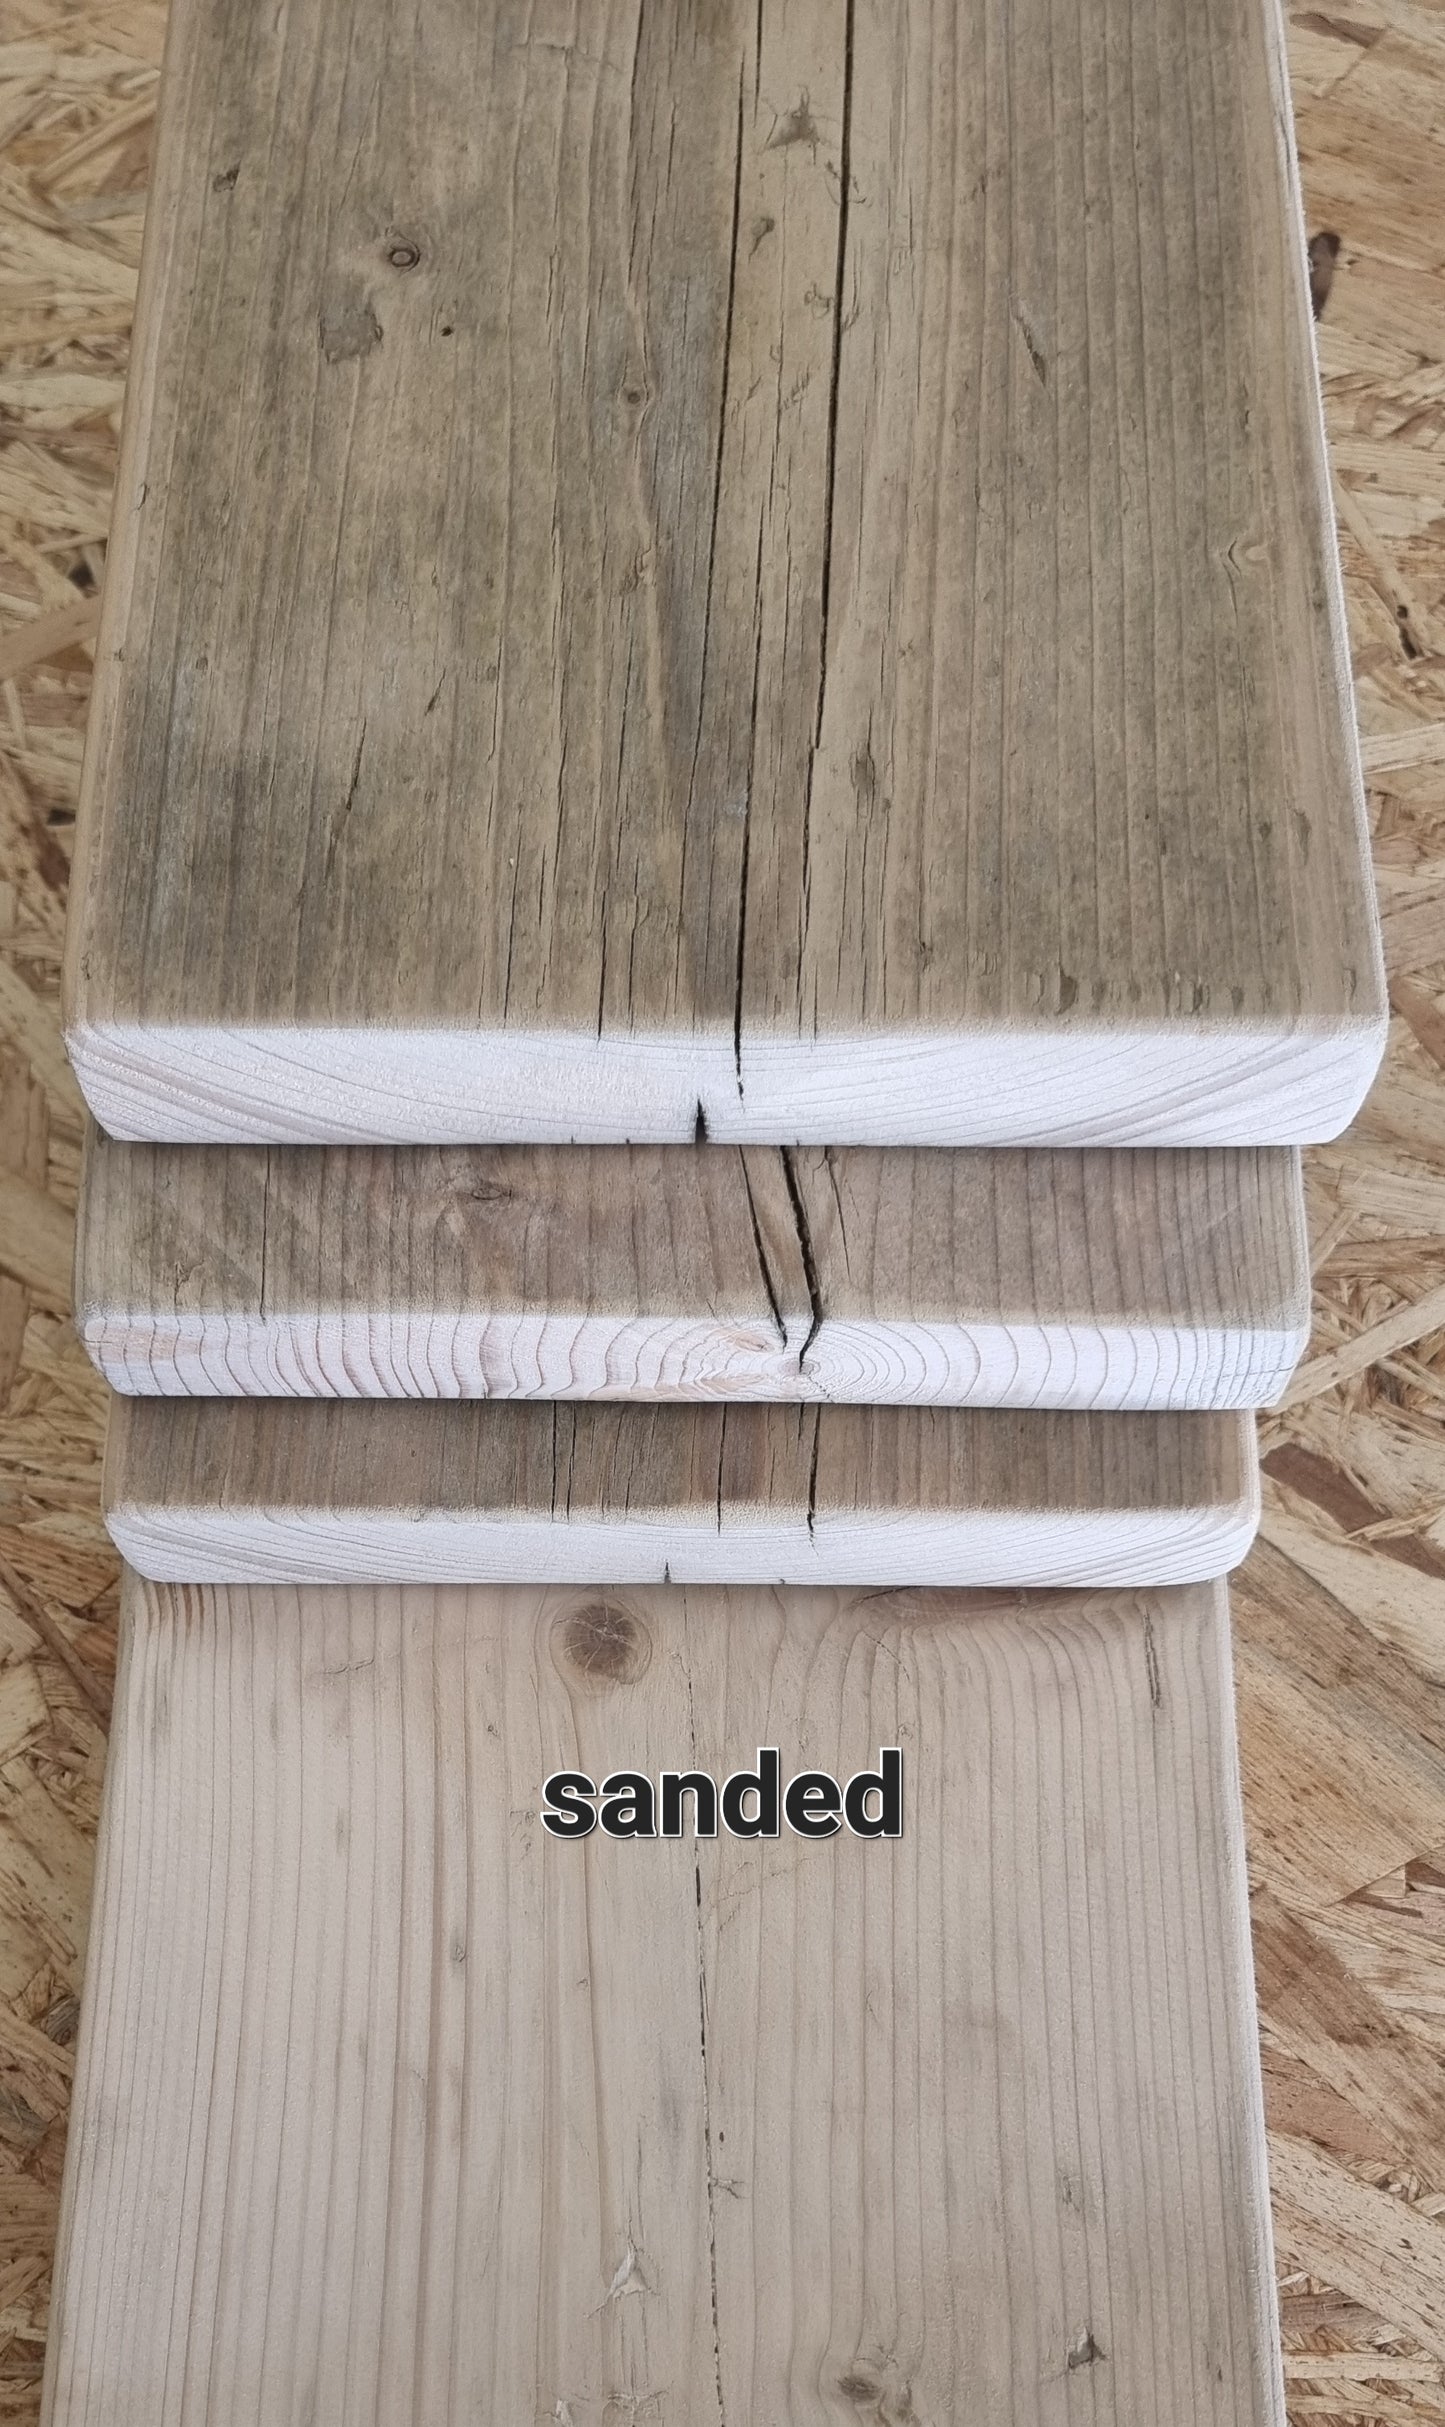 Sanded scaffold boards. Cut to size